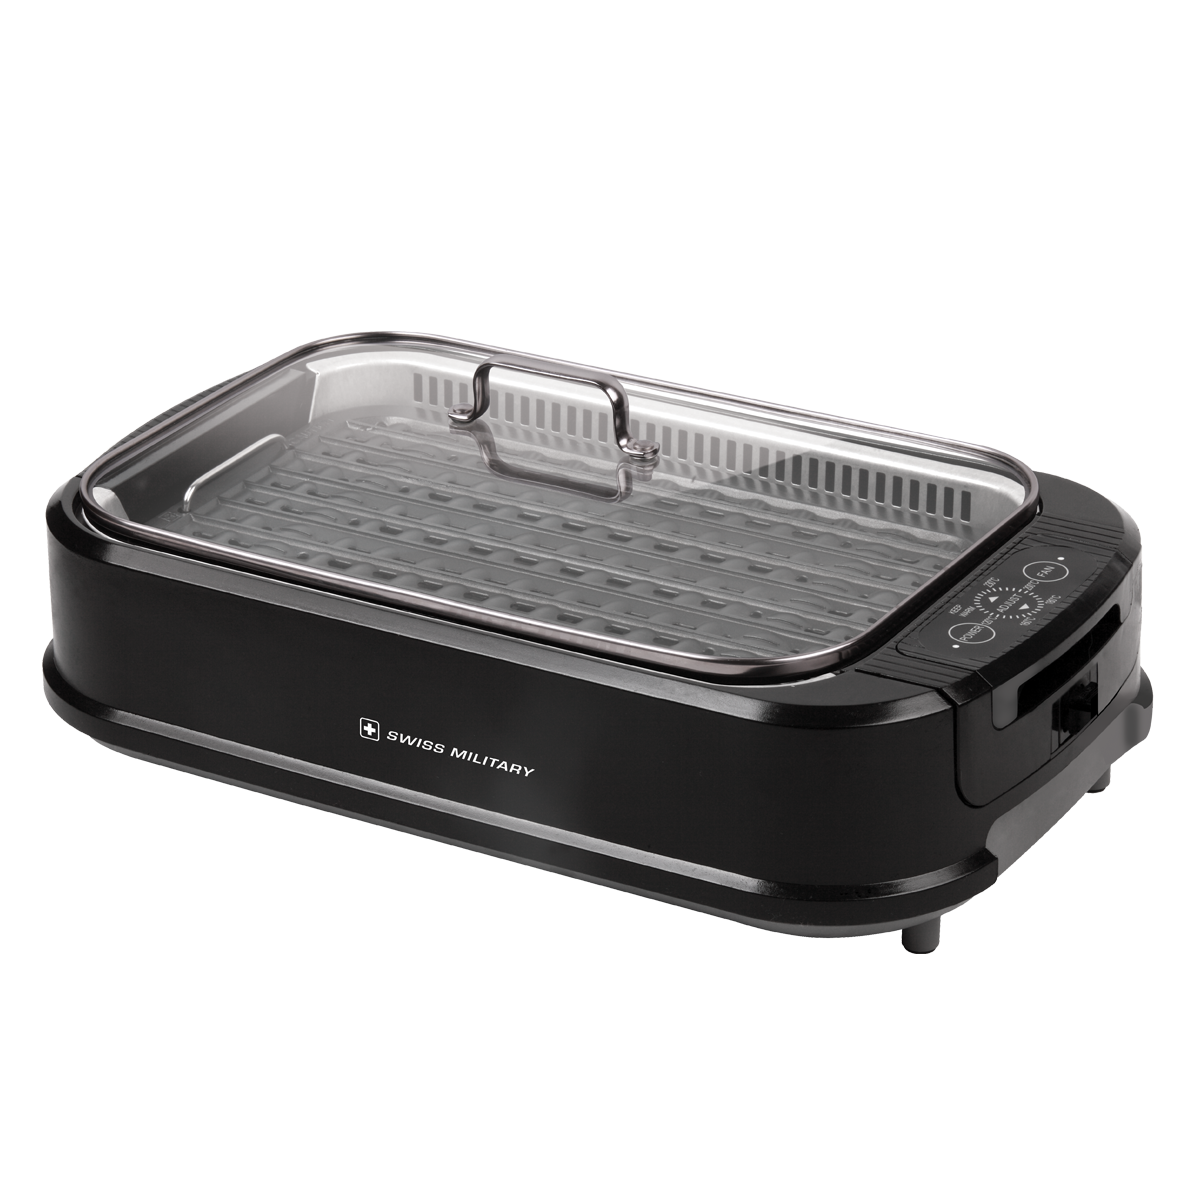 Swiss Military Smokeless Grill with Glass Lid